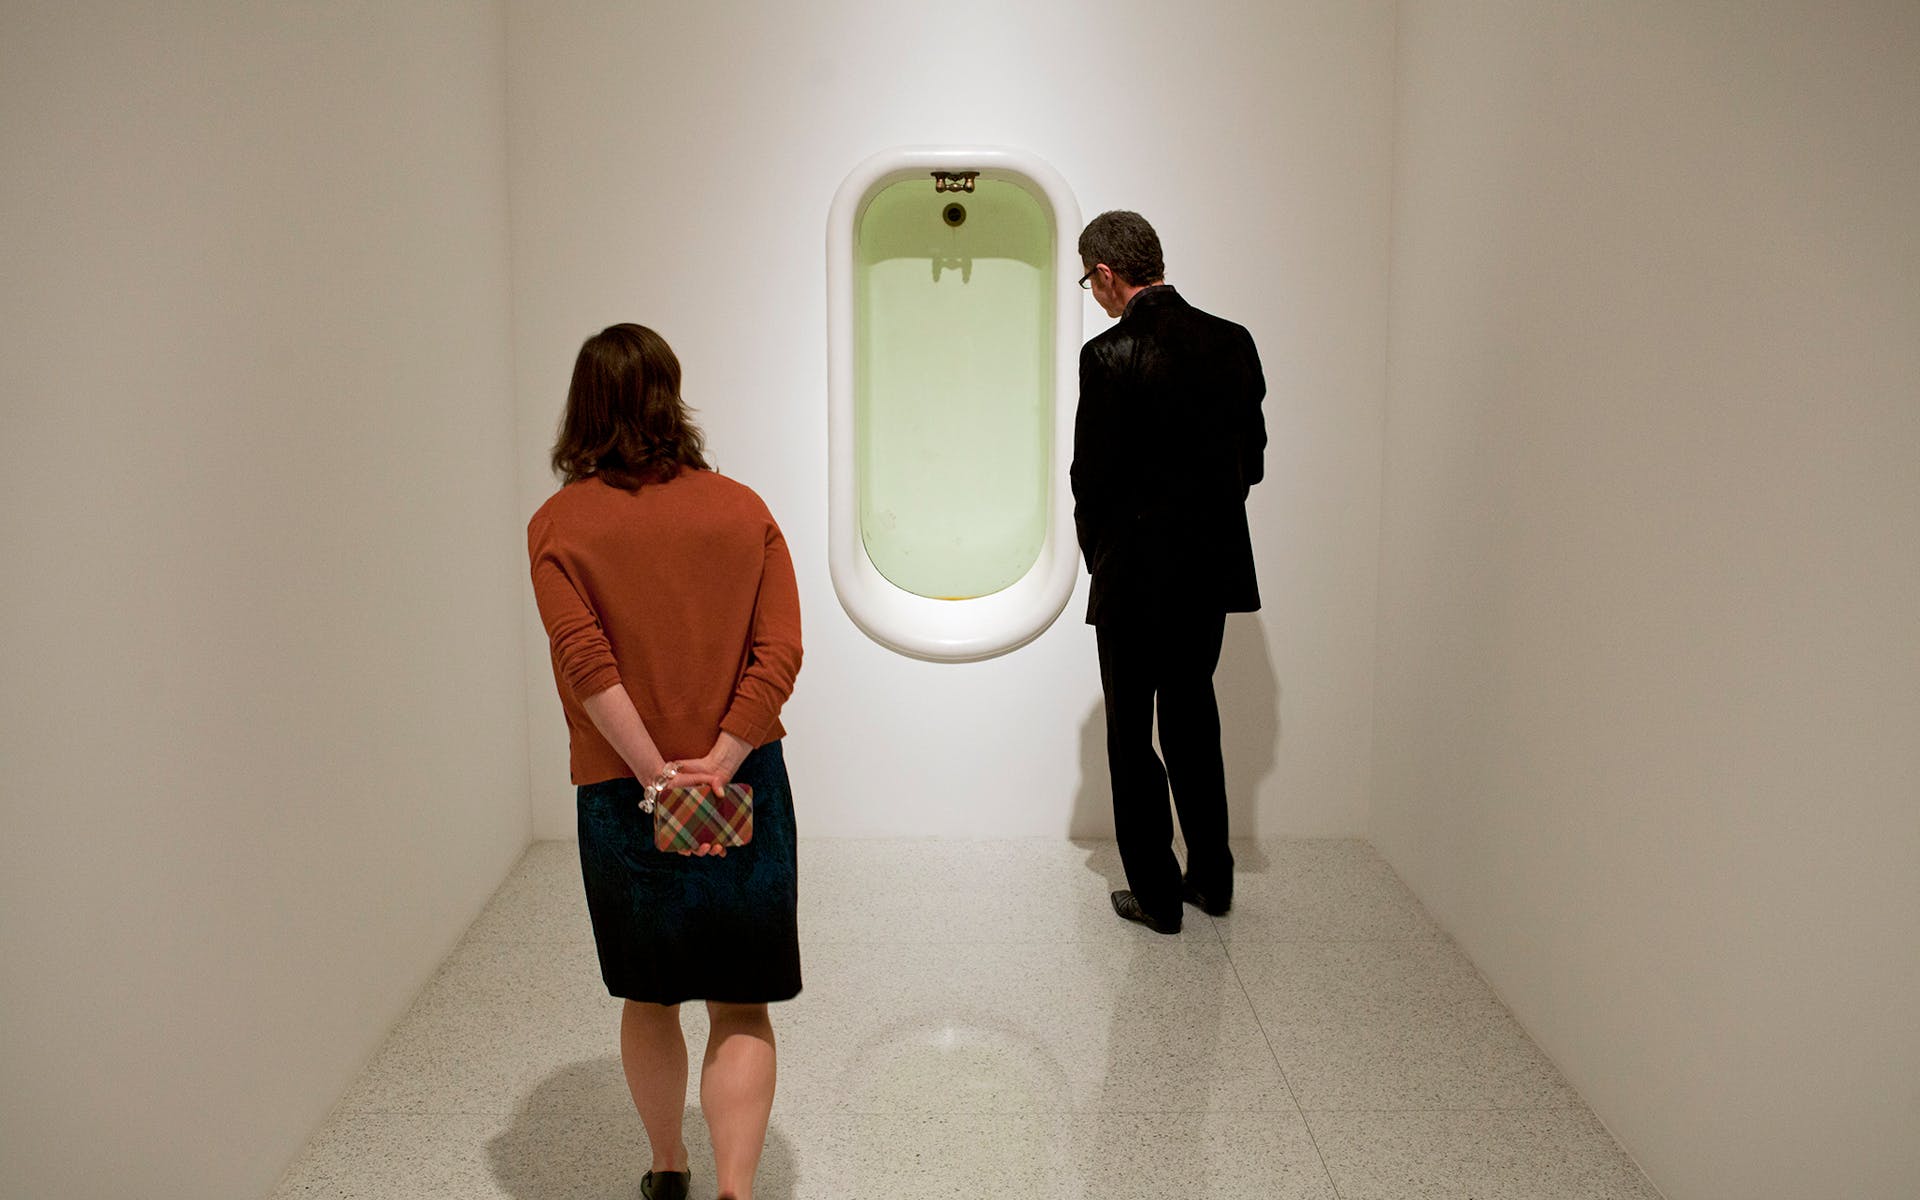 In the exhibition Lifelike, works based on everyday objects invoked a dreamlike world, such as Charles Ray’s Bath (1989)—a liquid-filled sculpture embedded in the wall that elicits a feeling of hovering above it.